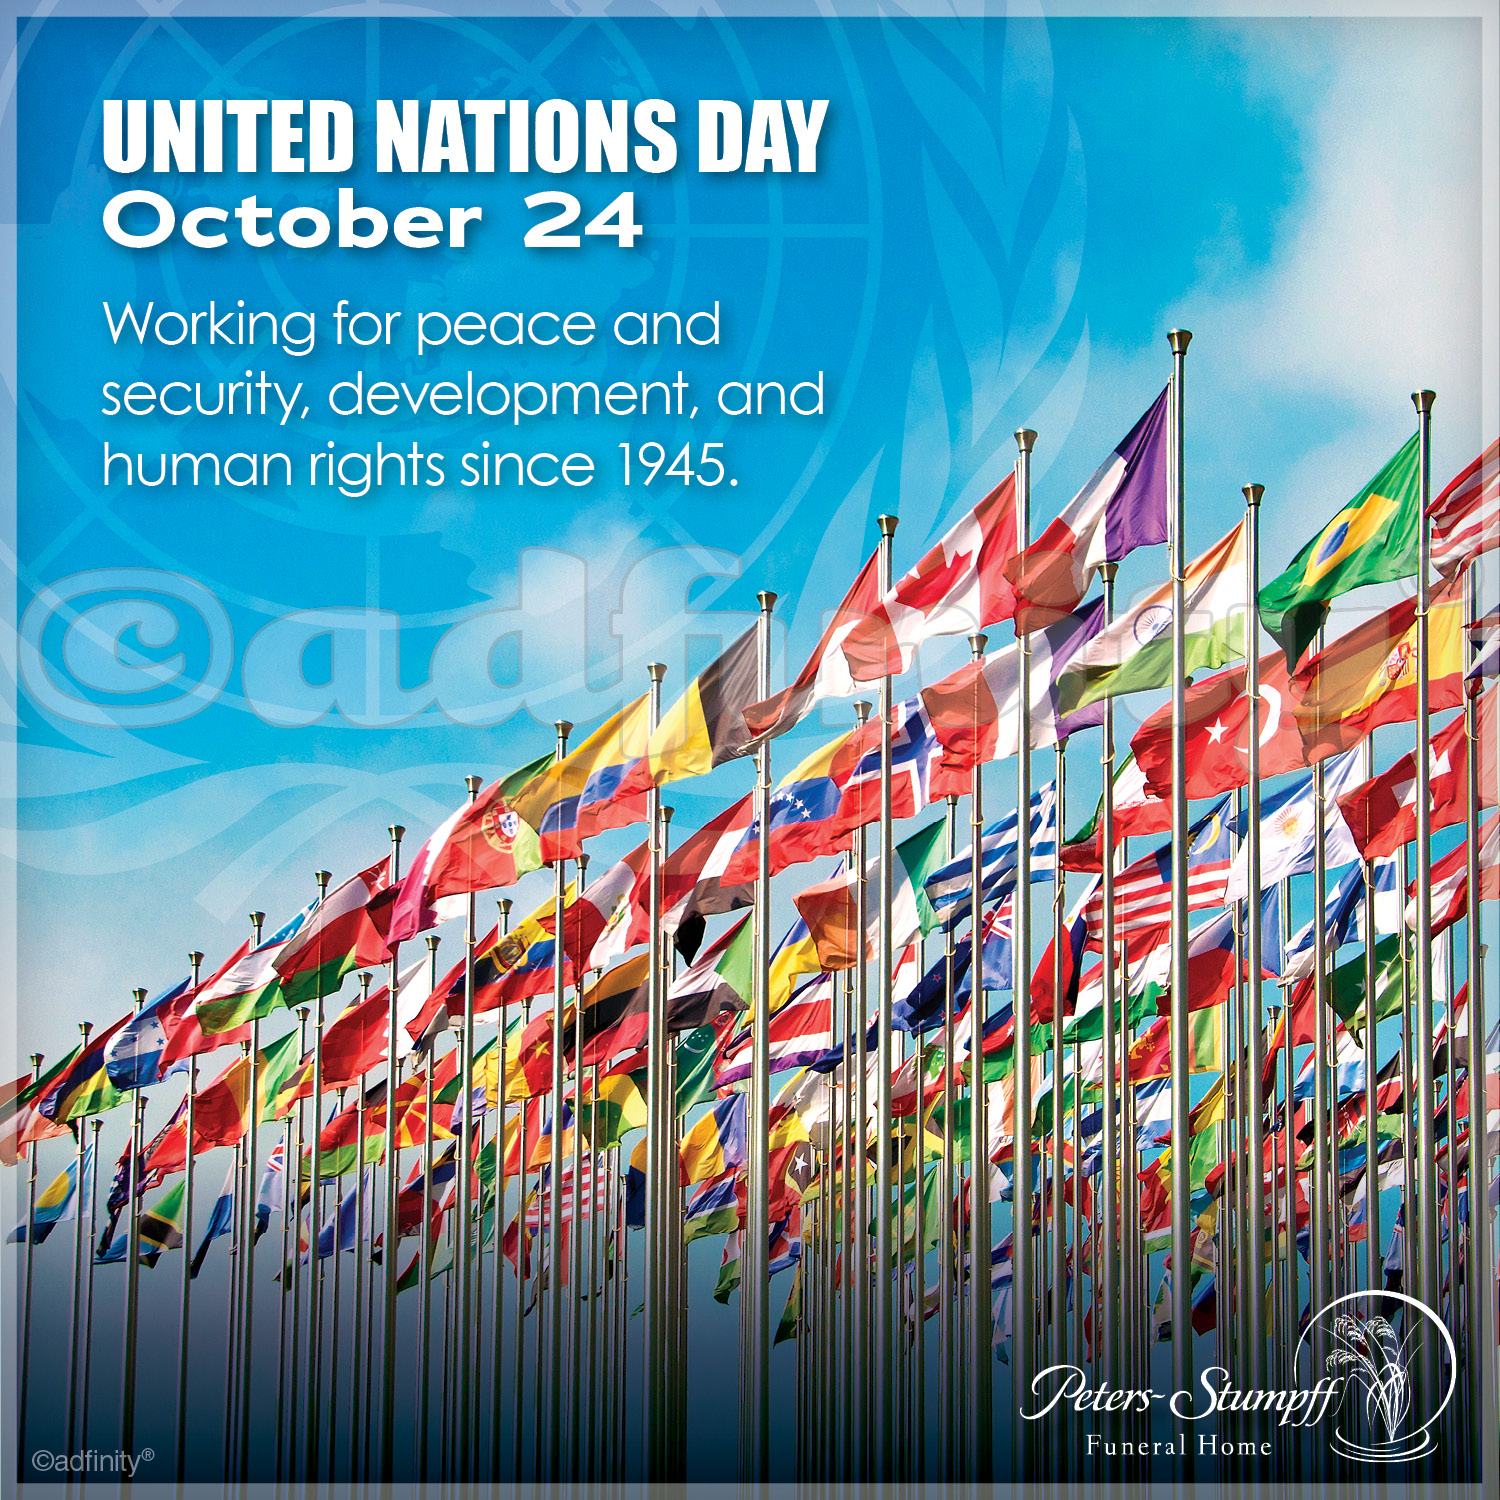 united nations day october 24 working for peace and security, development and human rights since 1945